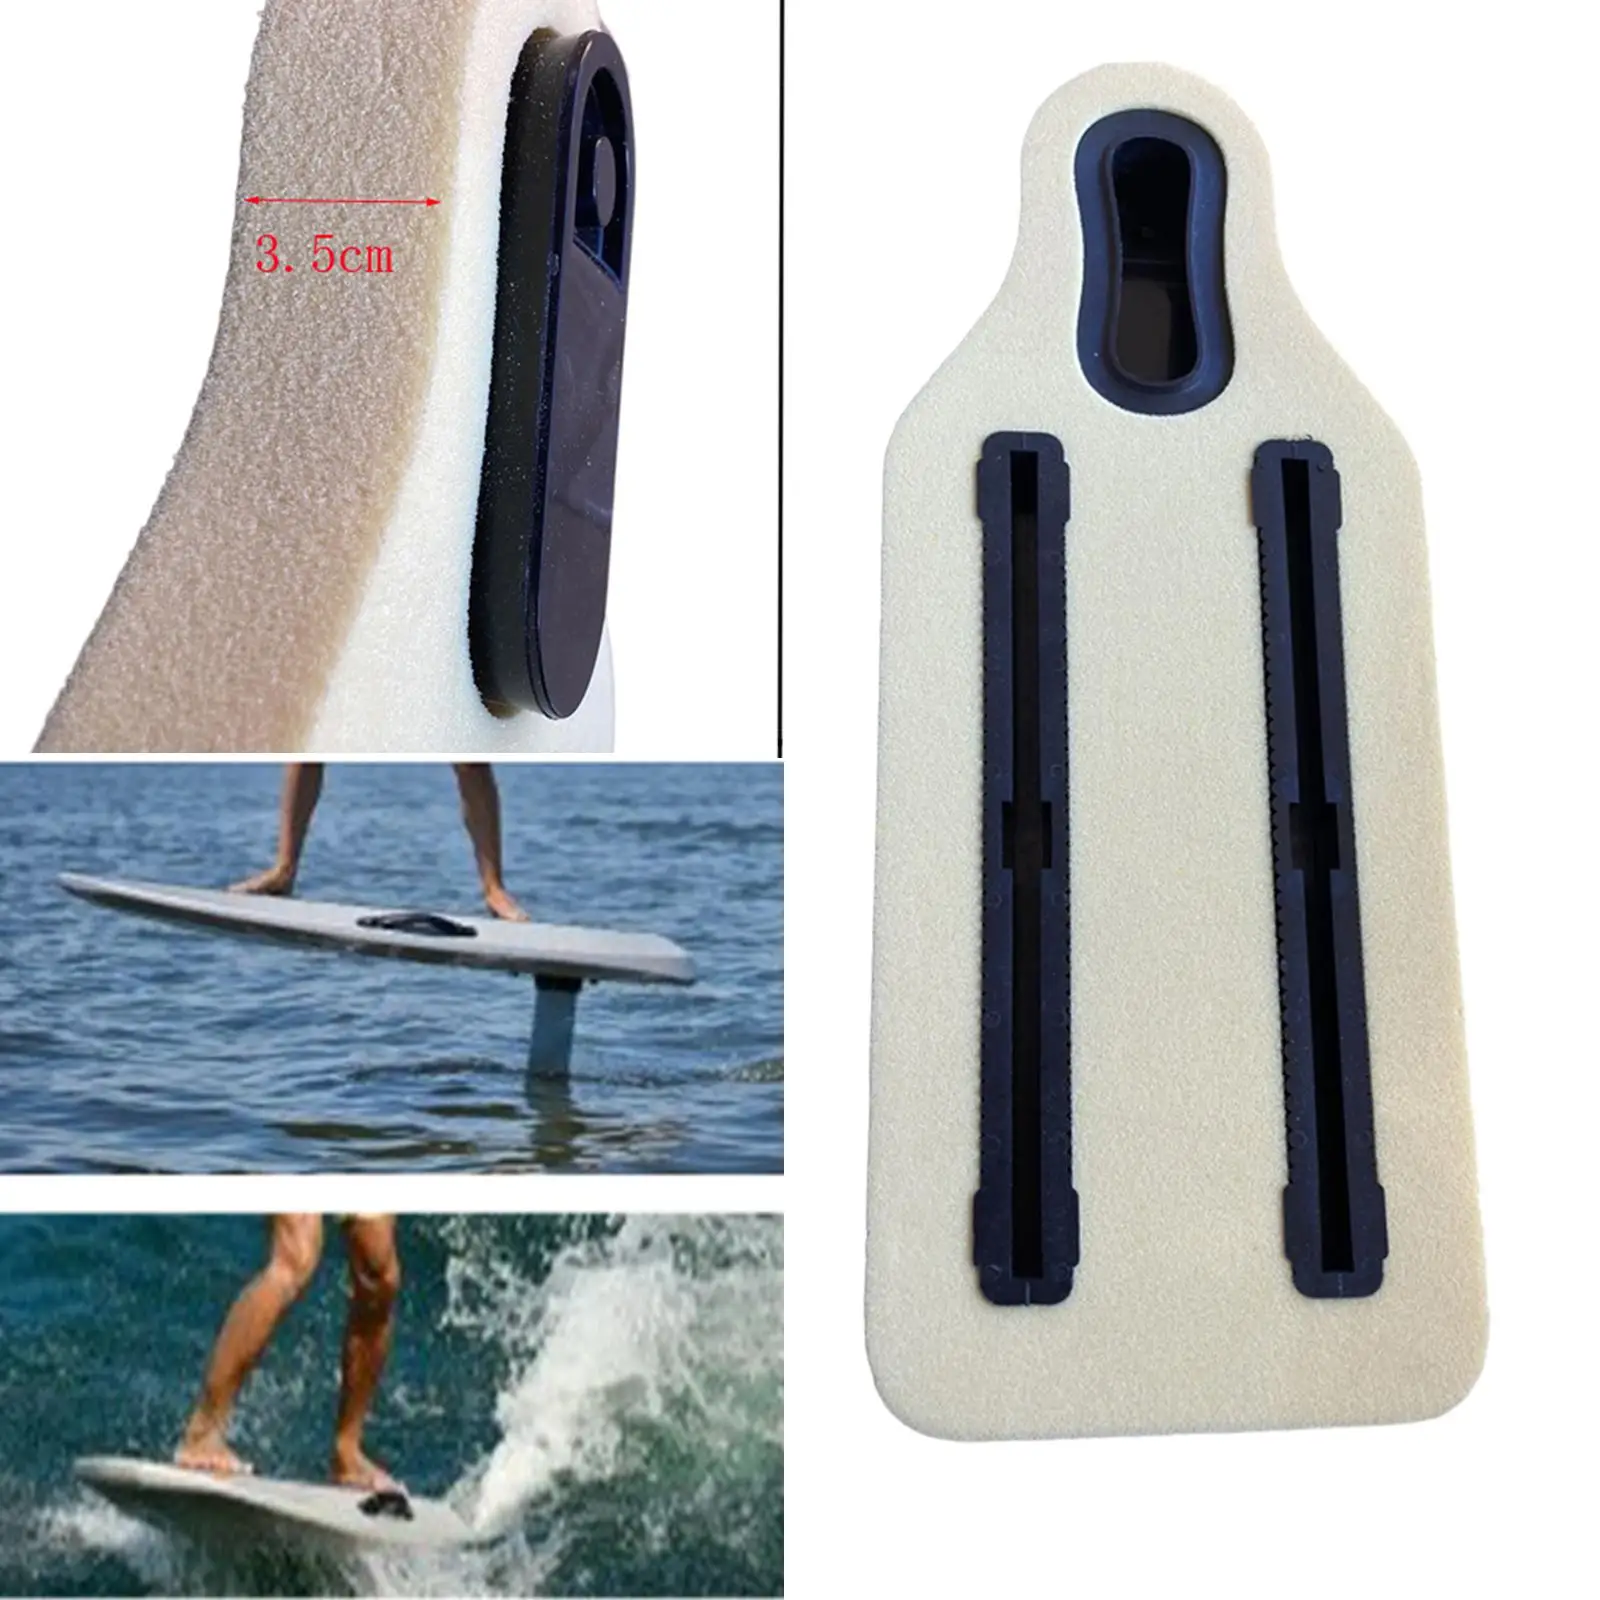 Surfboard Fin Box with Groove Foam PVC Handrail Professional Reinforced for